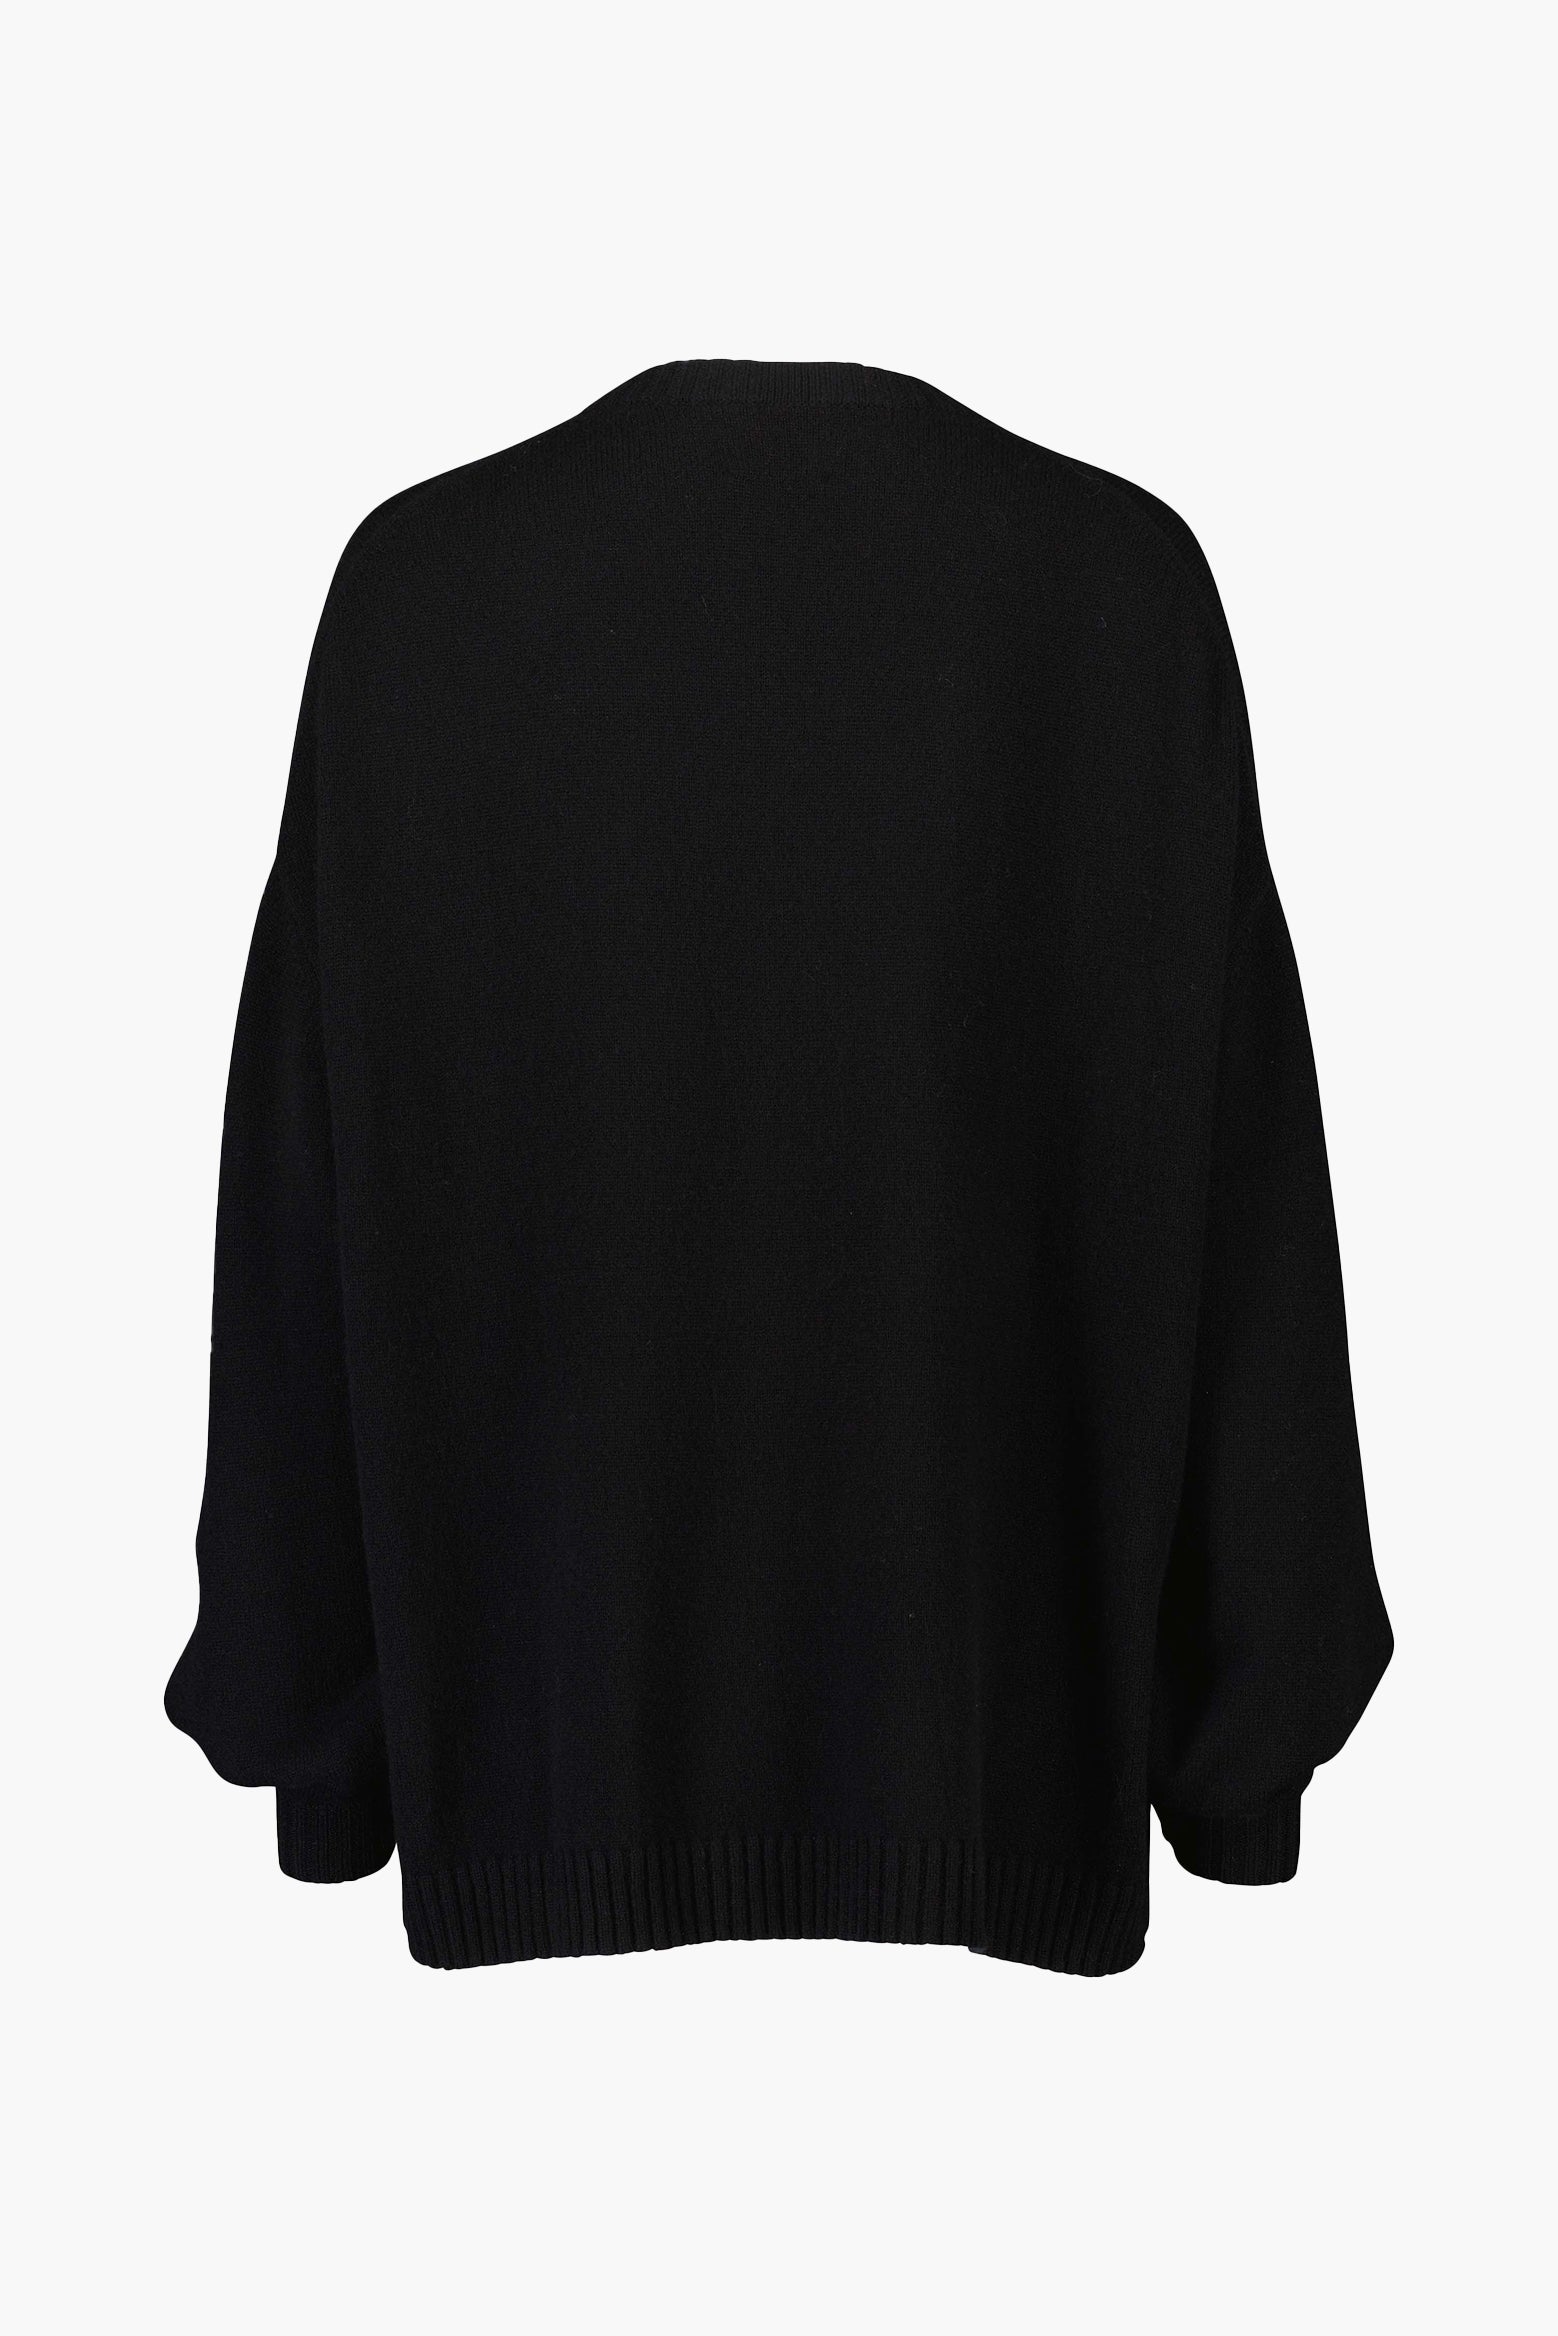 ALLUDE Oversize Crew in Black available at The New Trend Australia